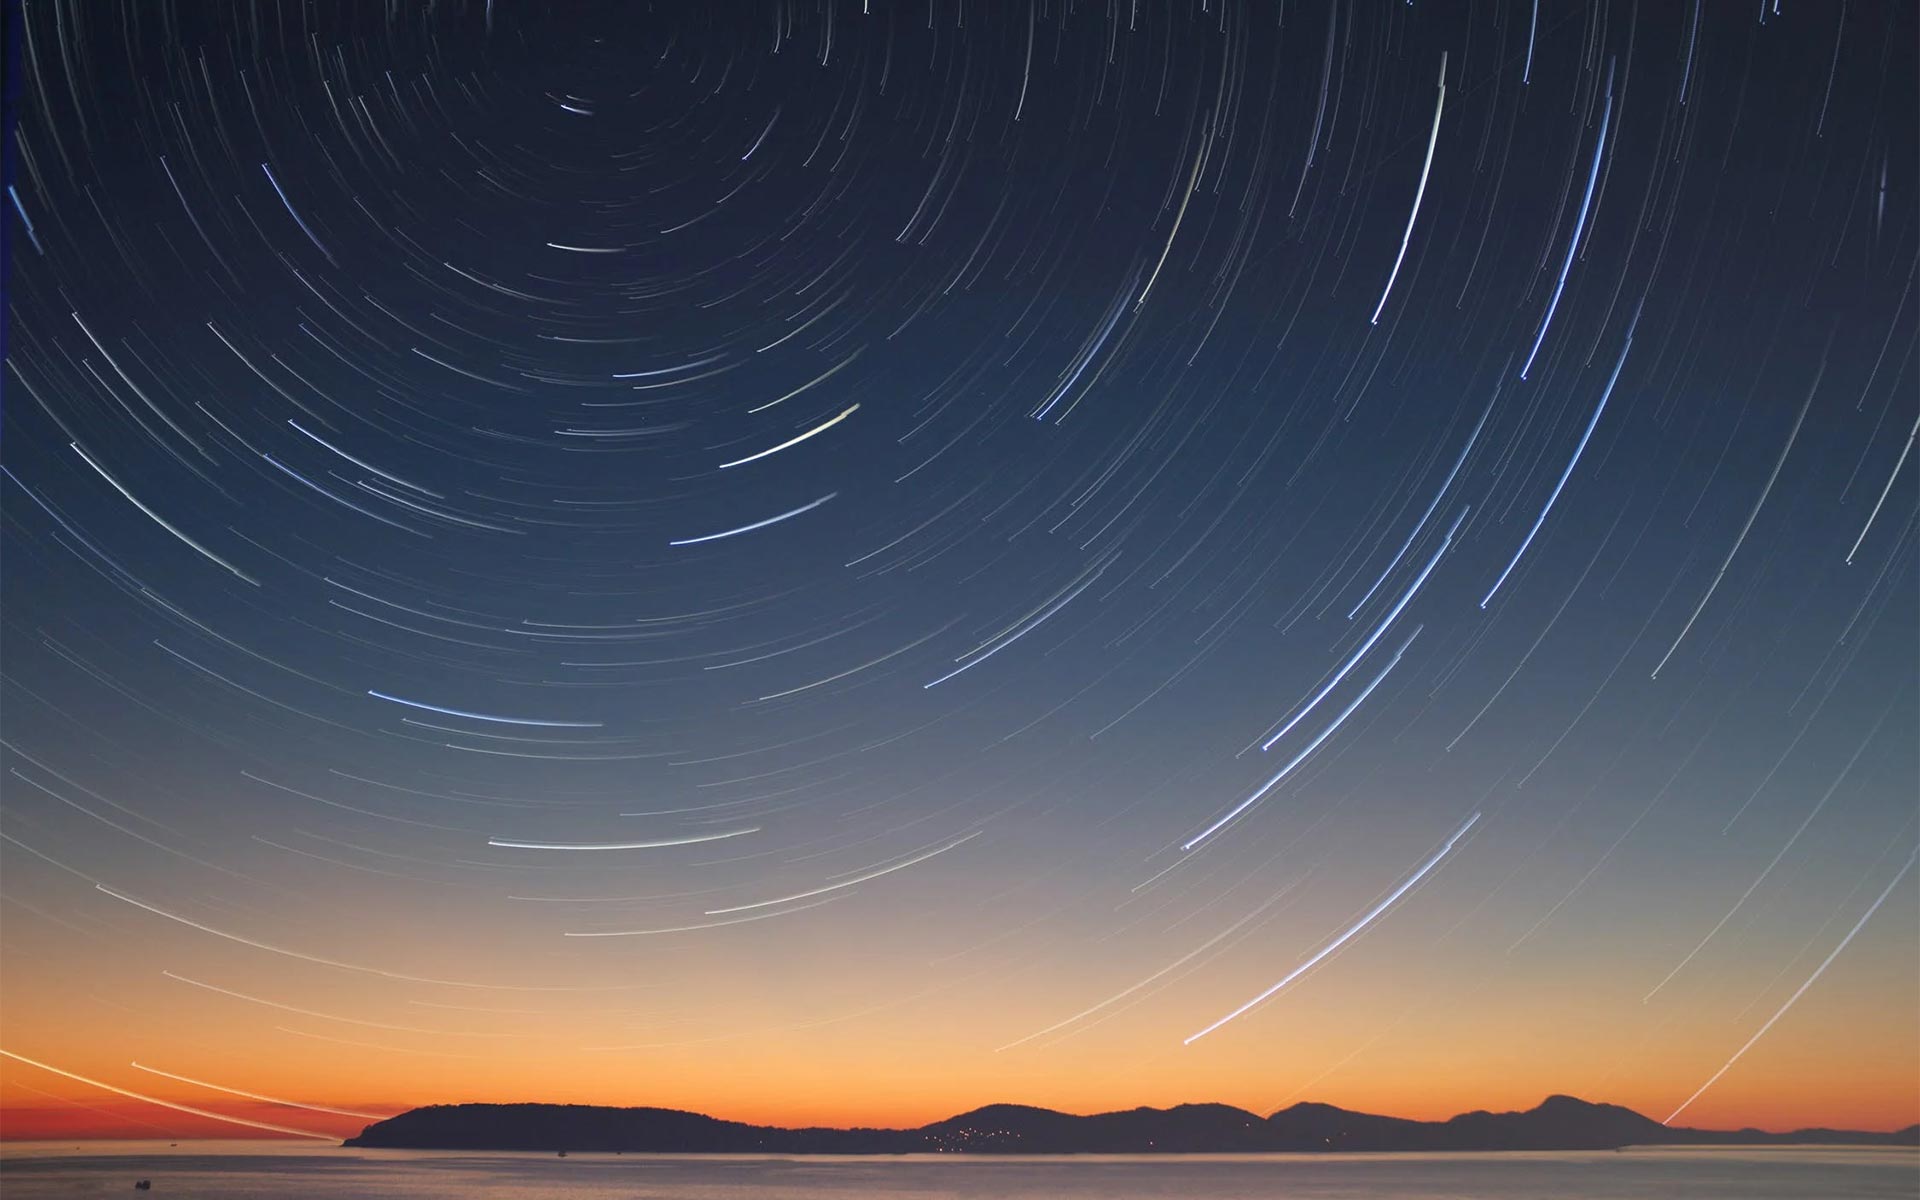 Star trails imposed on a costal sunset